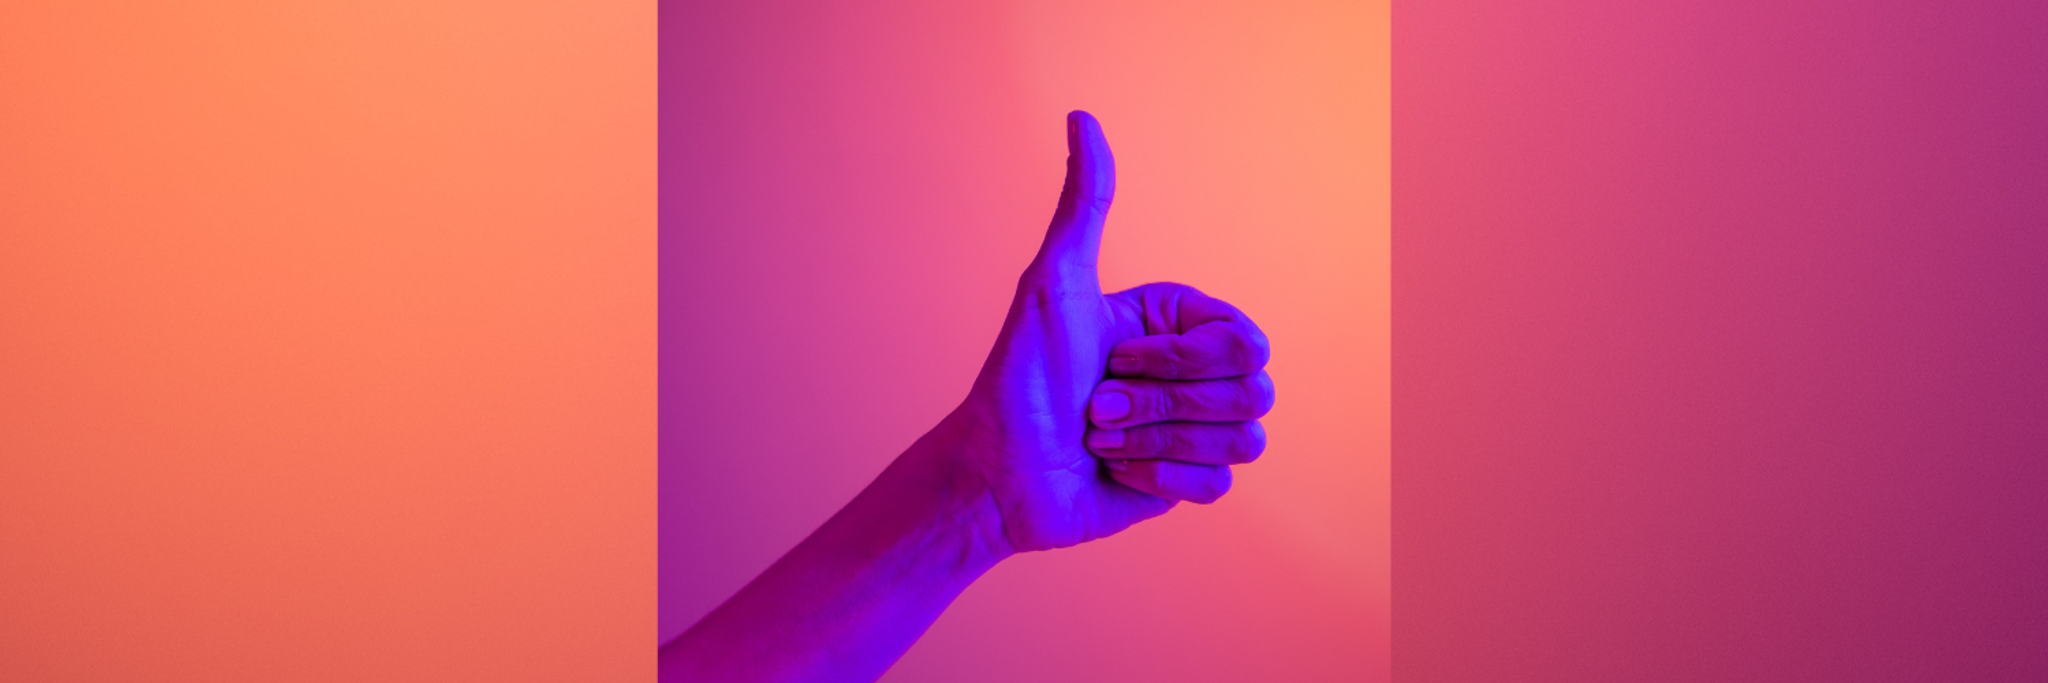 A hand giving a thumbs up on a pink background